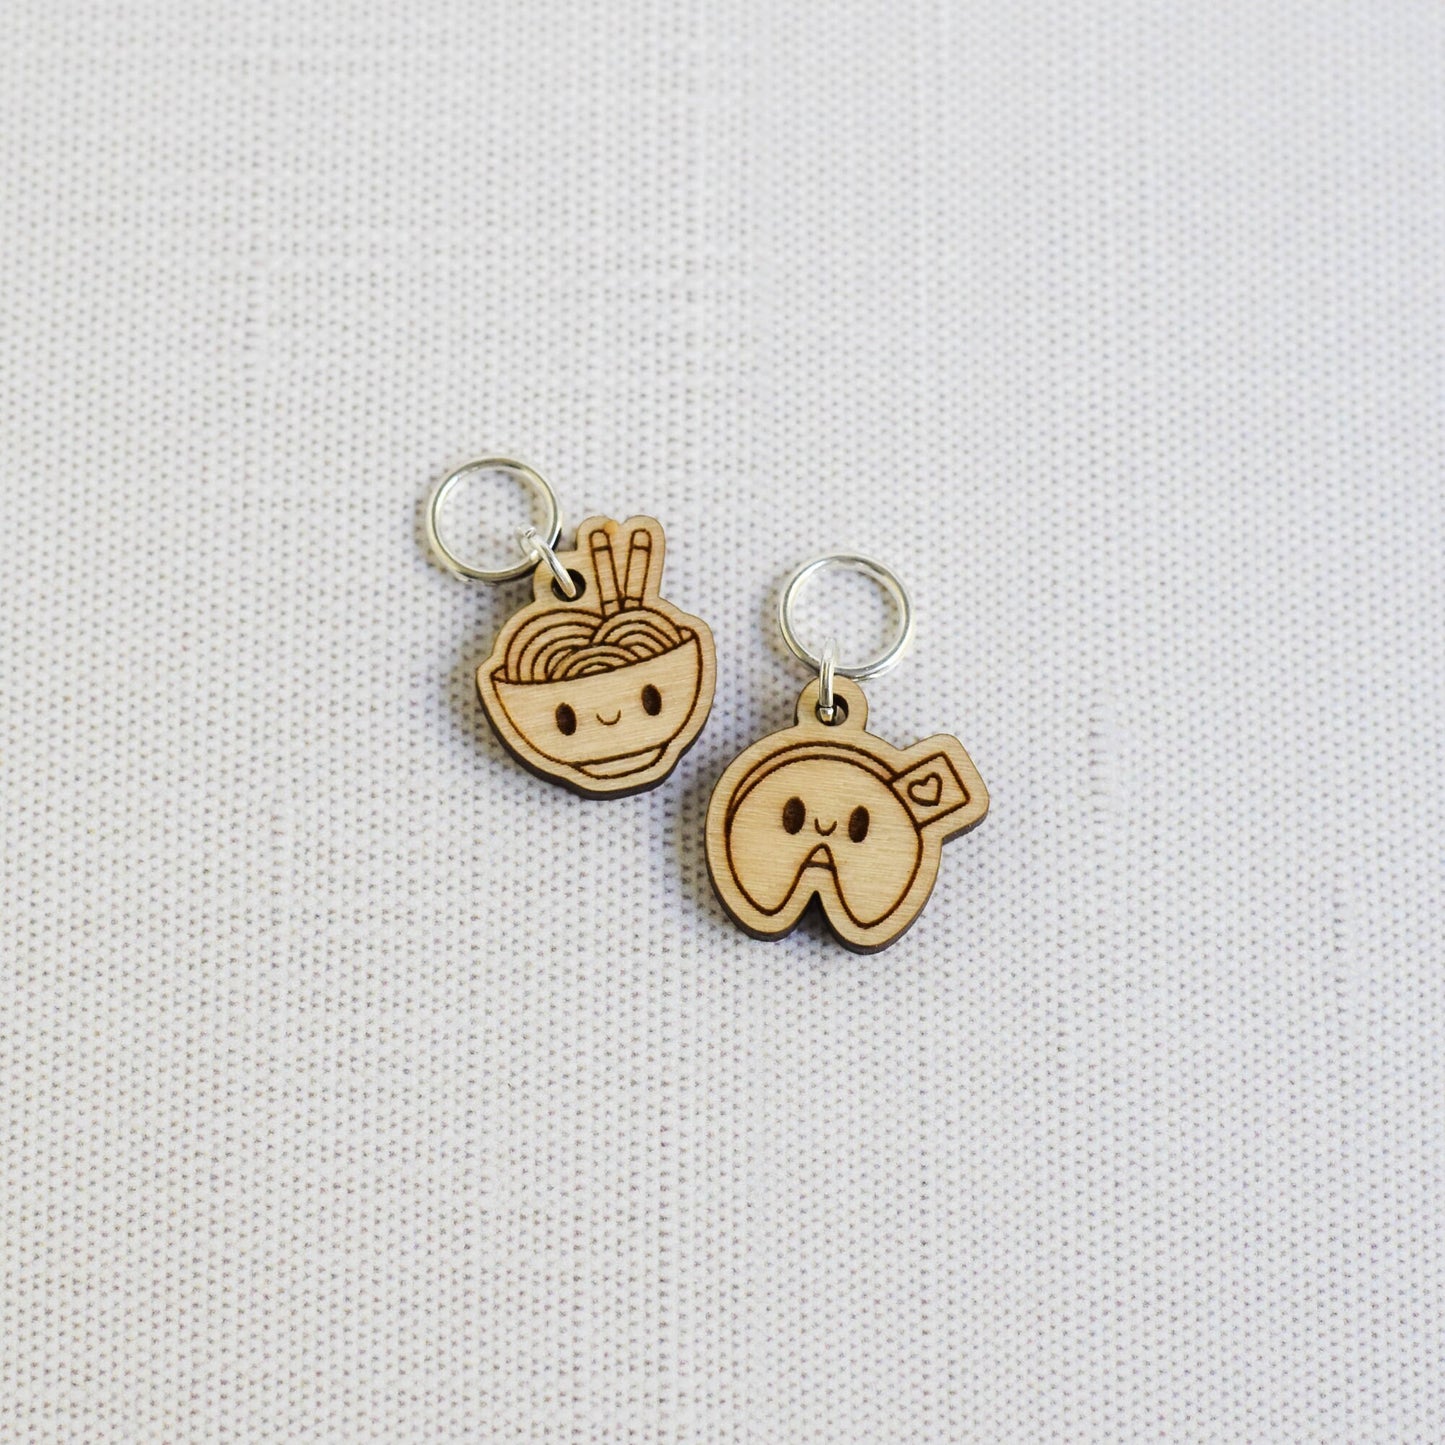 Set of 2 Laser Engraved Stitch Markers - Kawaii Ramen and Fortune Cookie